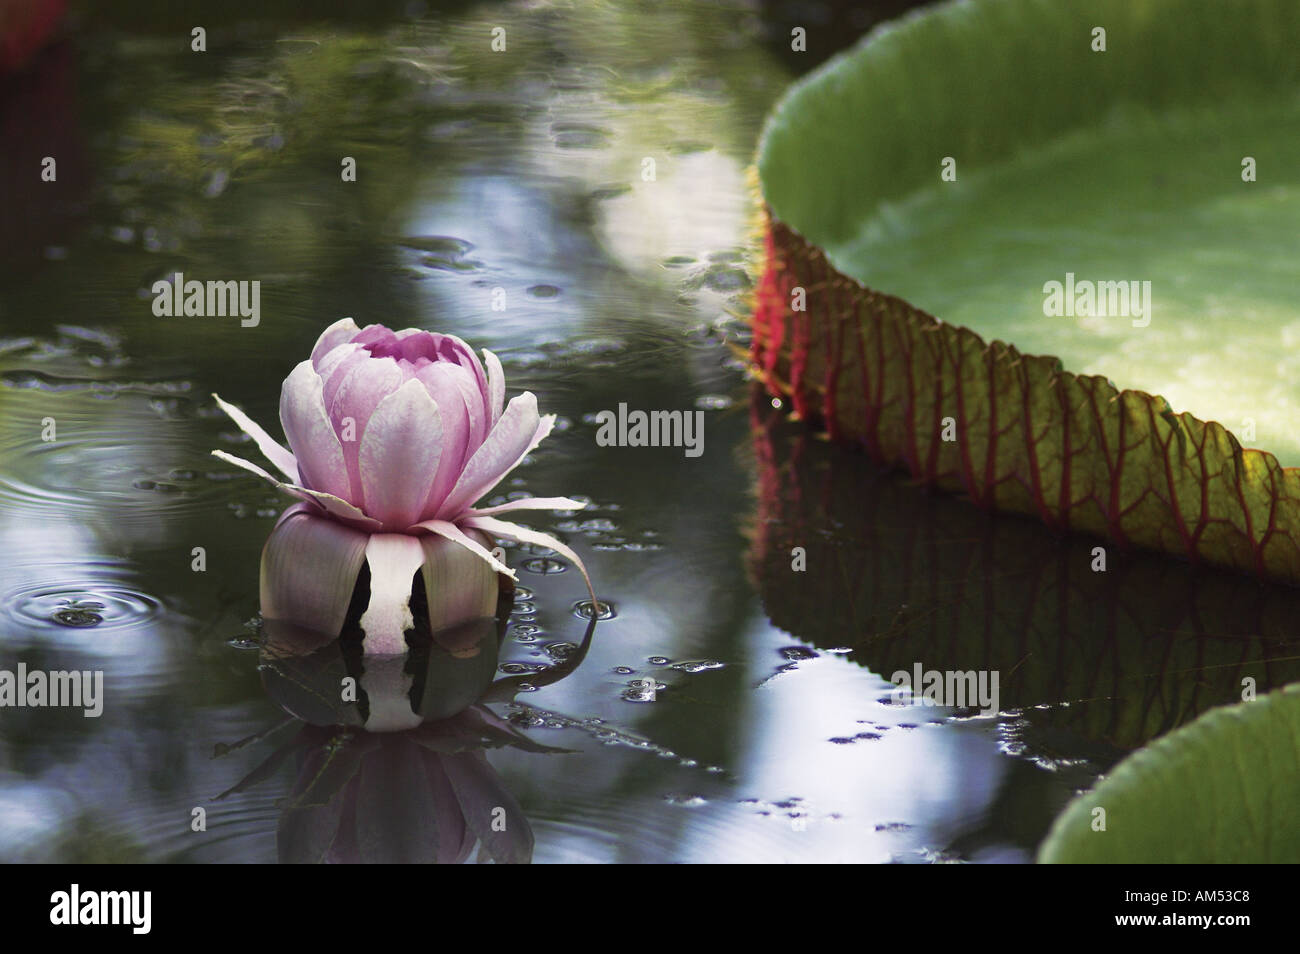 water lily flower in a pond Stock Photo